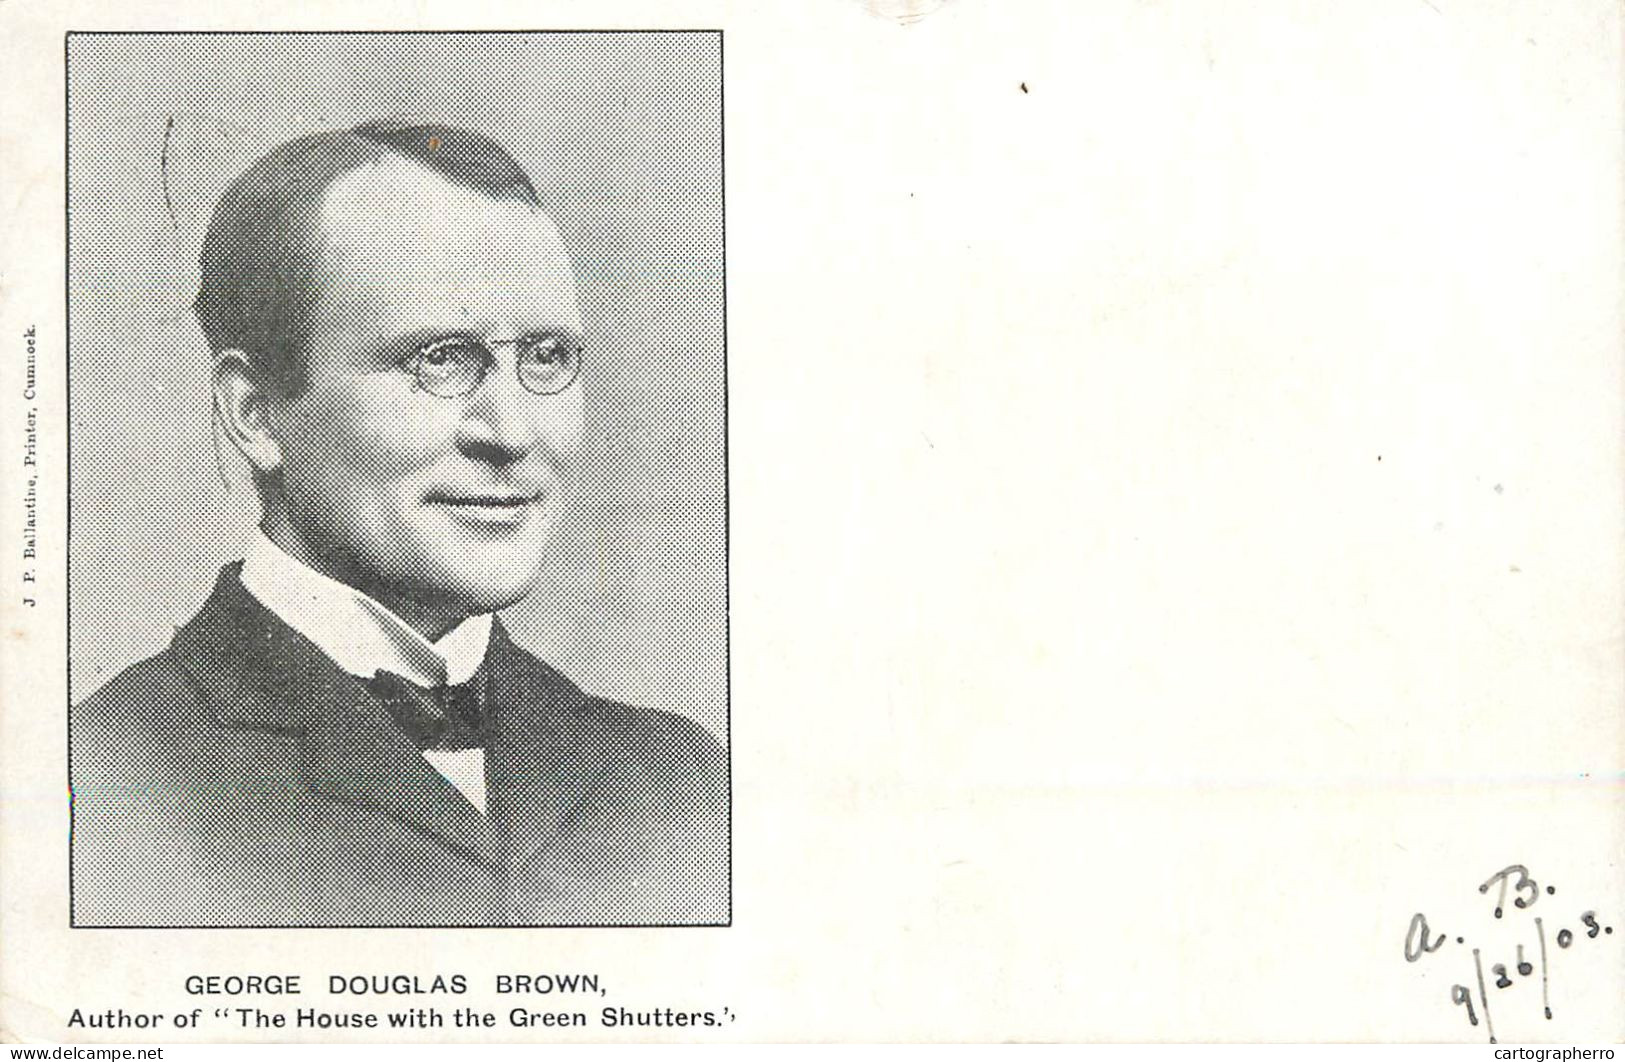 George Douglas Brown Author Of "The House With The Green Shutters" - Ecrivains